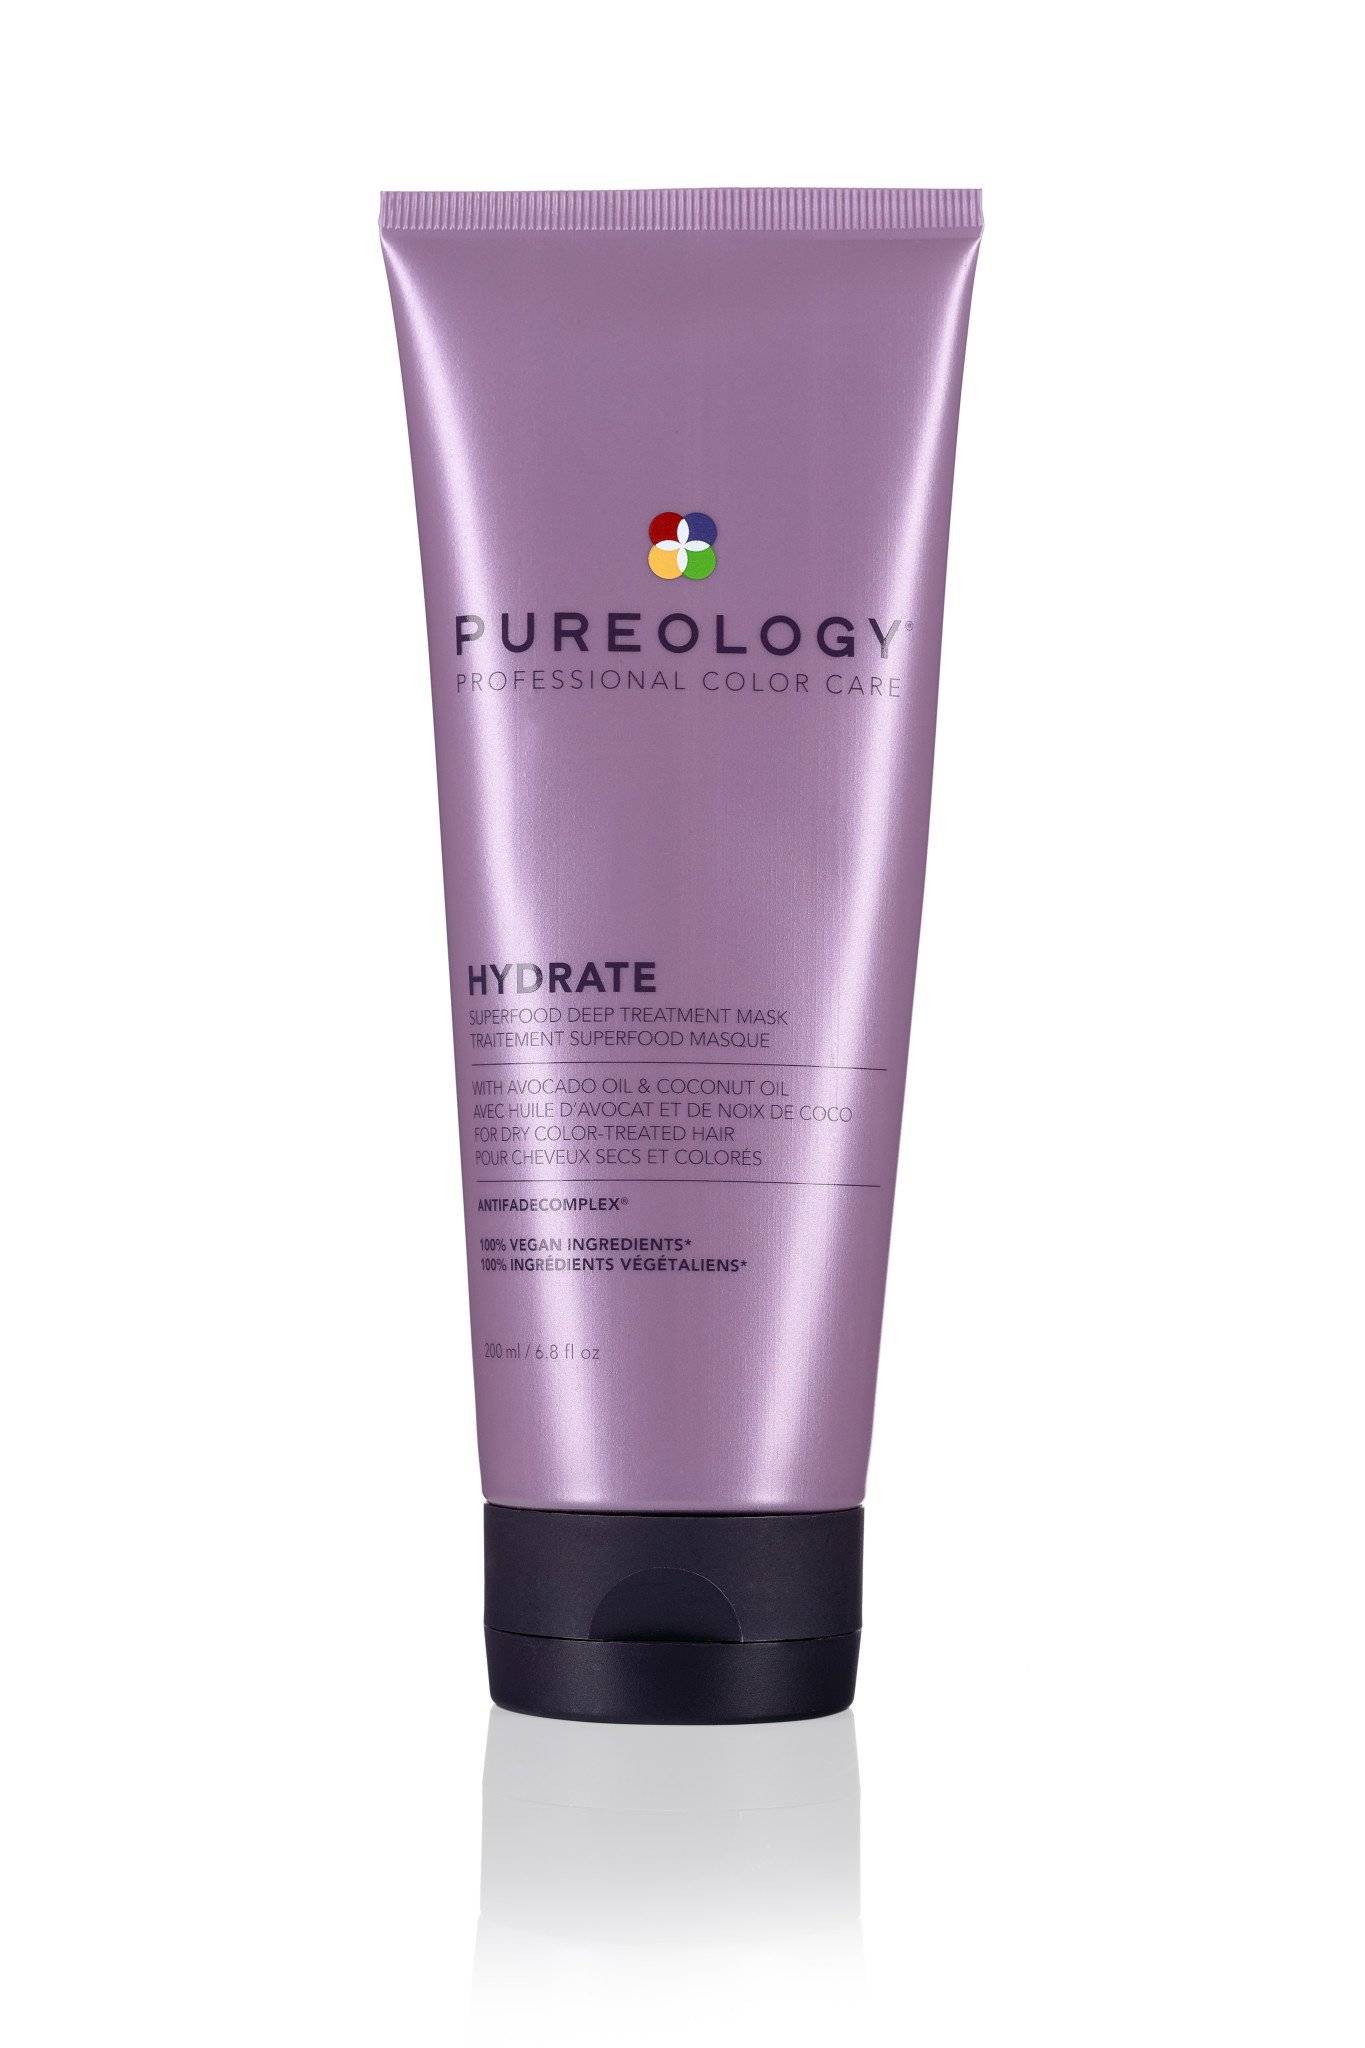 PUREOLOGY - HYDRATE Traitement Superfood Masque